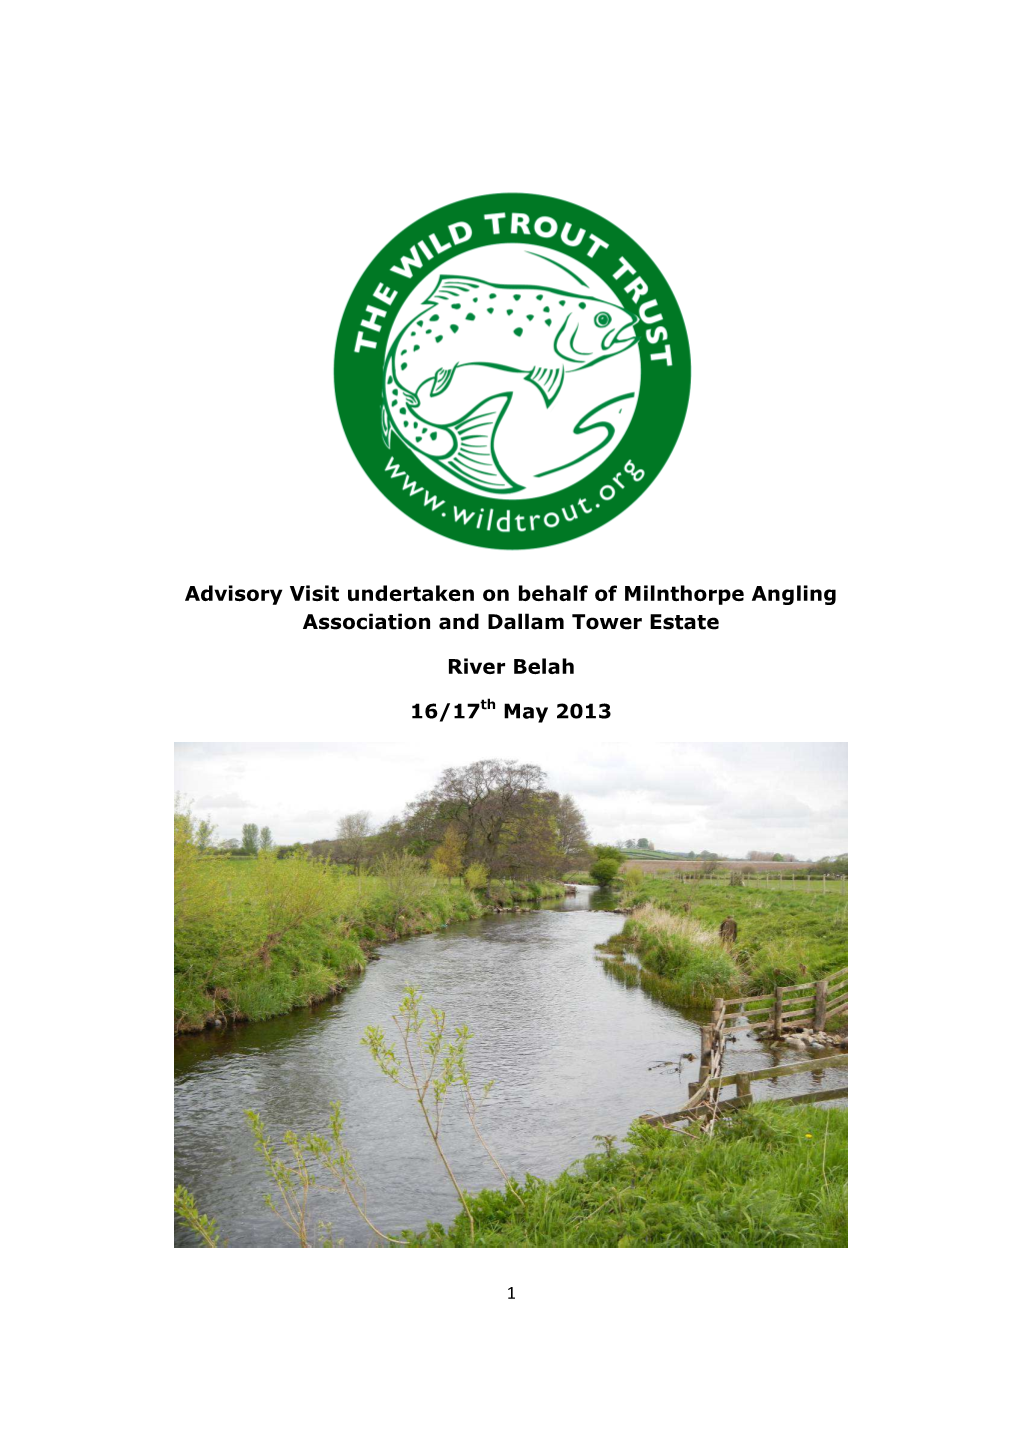 Advisory Visit Undertaken on Behalf of Milnthorpe Angling Association and Dallam Tower Estate